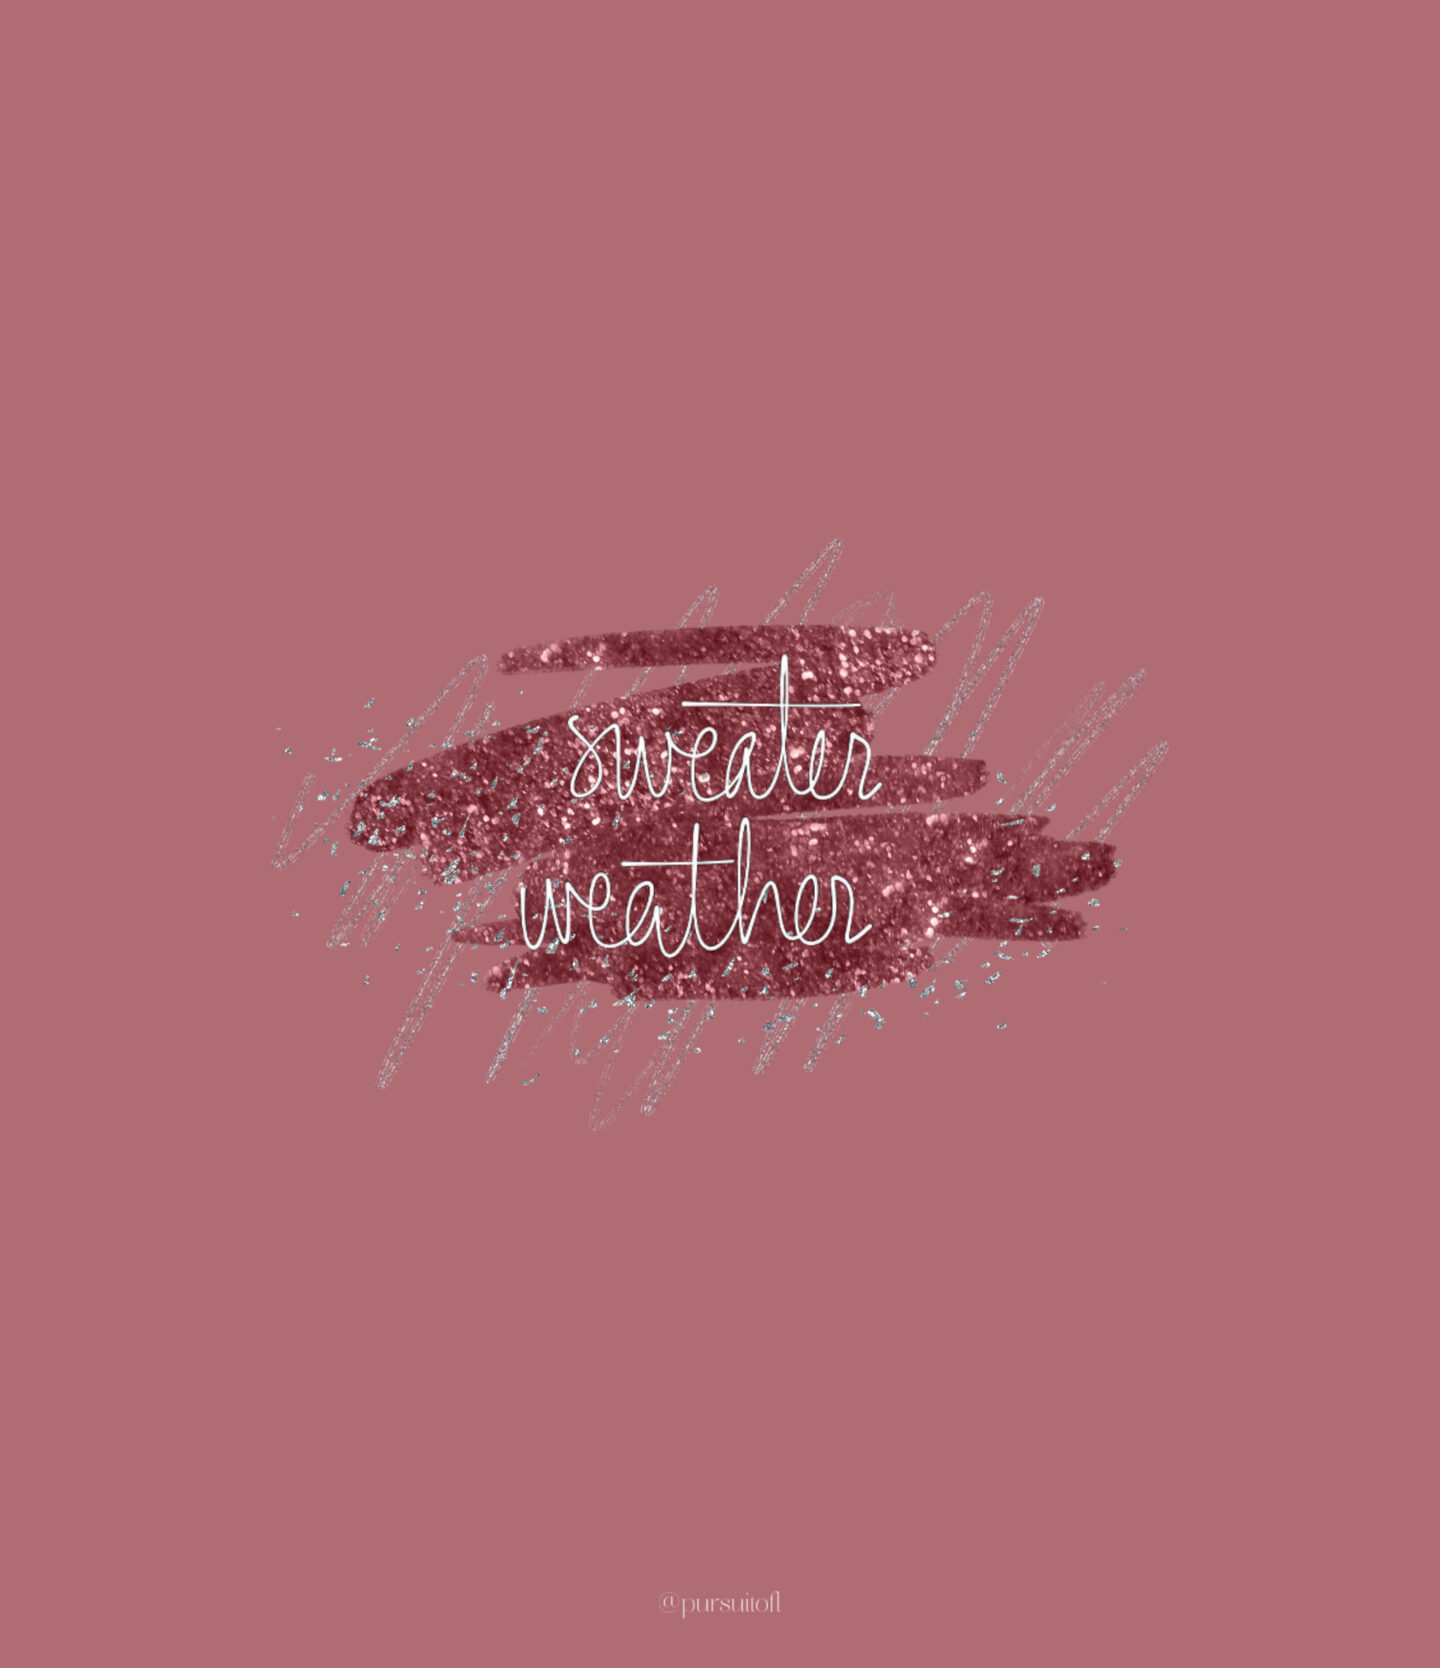 Mauve Tablet Wallpaper with Silver and Maroon Glitter Swatch and White Sweater Weather Text